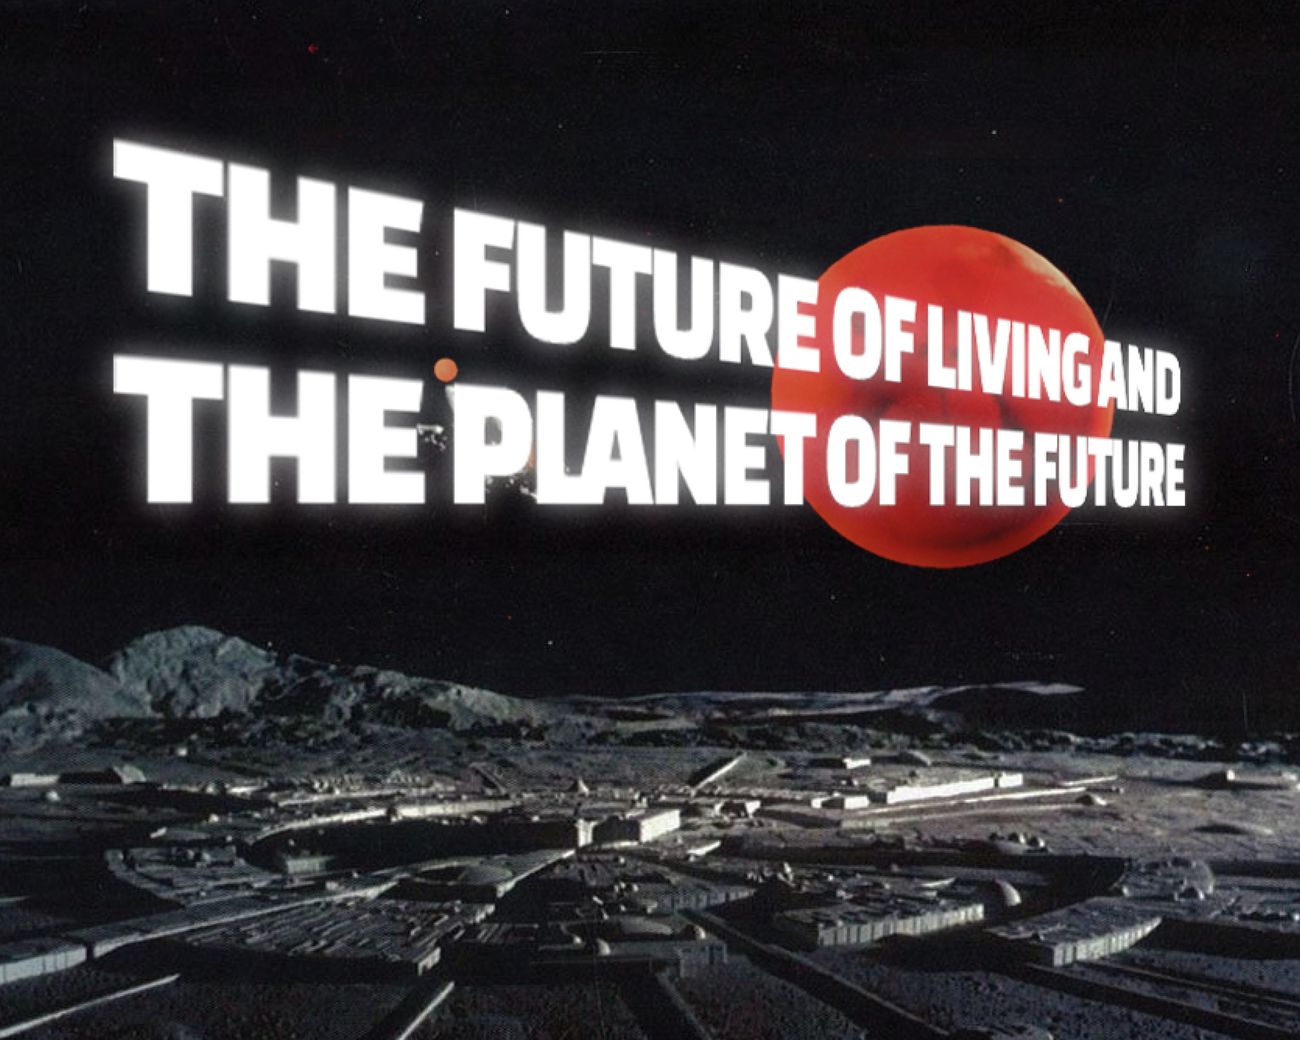 the Future of Living and the Planet of the Future